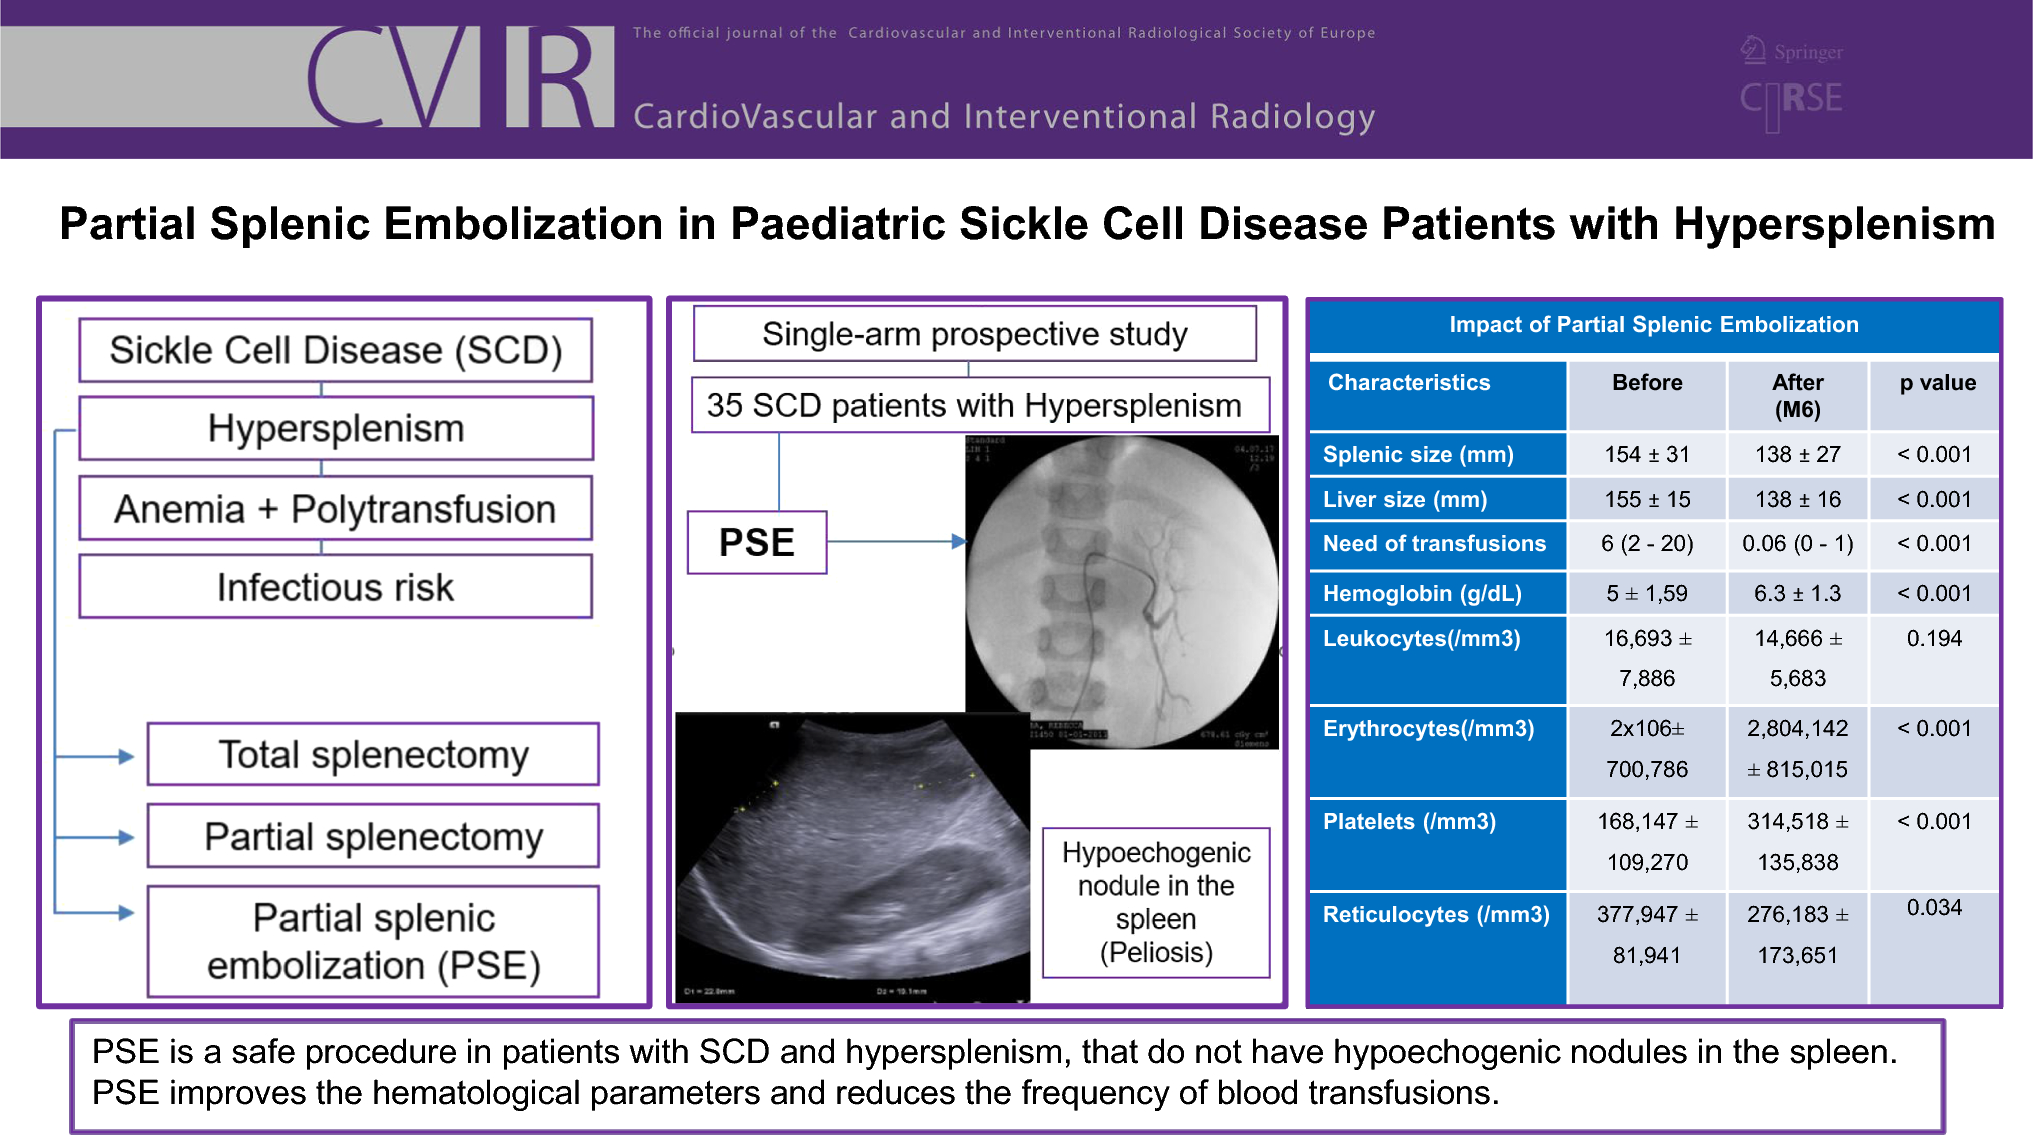 Partial Splenic Embolization in Paediatric Sickle Cell Disease Patients with Hypersplenism